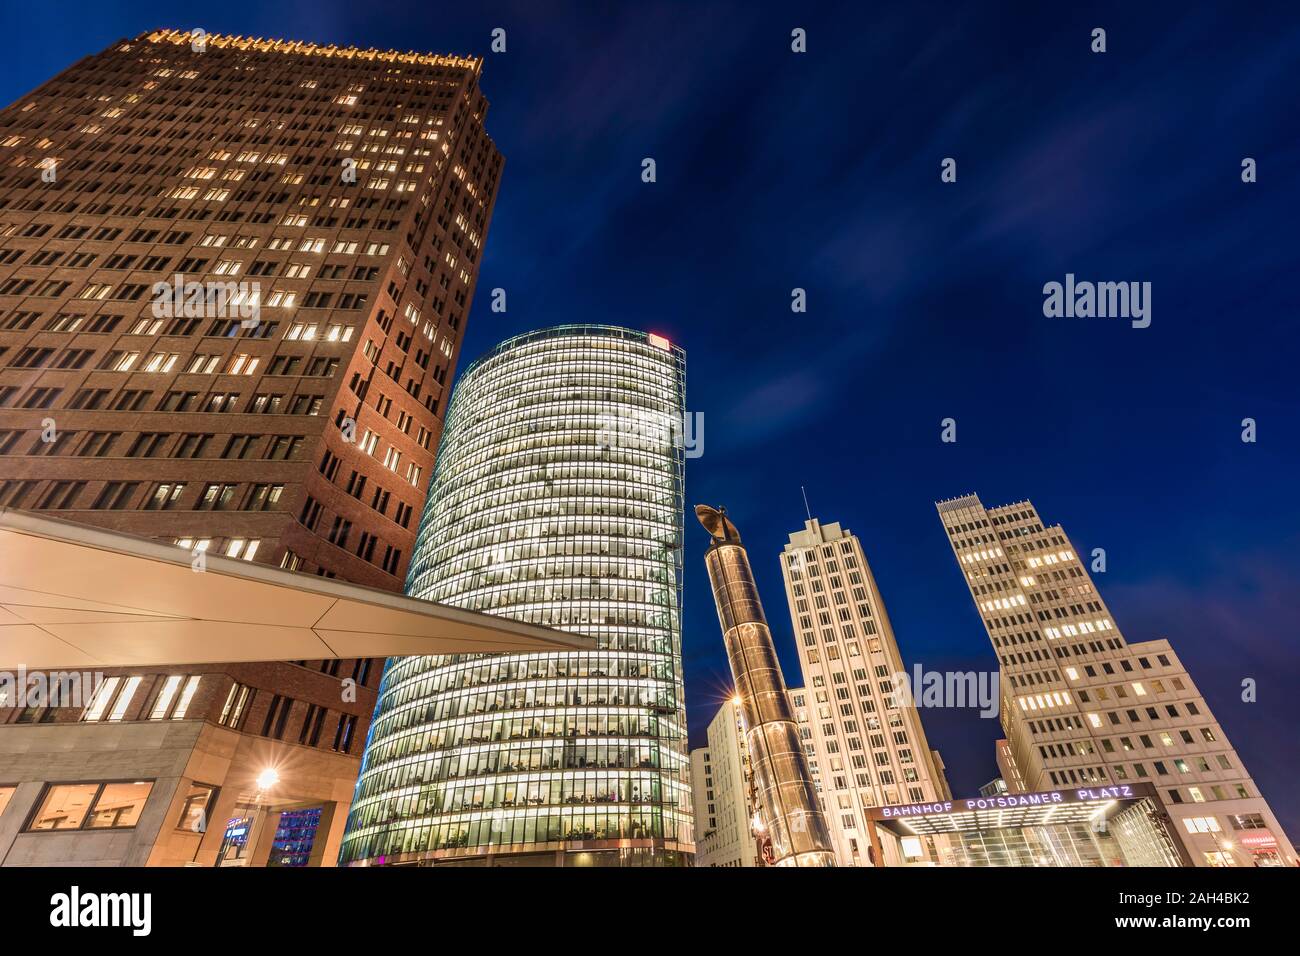 Allemagne, Berlin, Mitte, Potsdamer Platz, Kollhoff-Tower Bahntower Beisheim-Center,,, Low angle view of skyscrapers at Dusk Banque D'Images